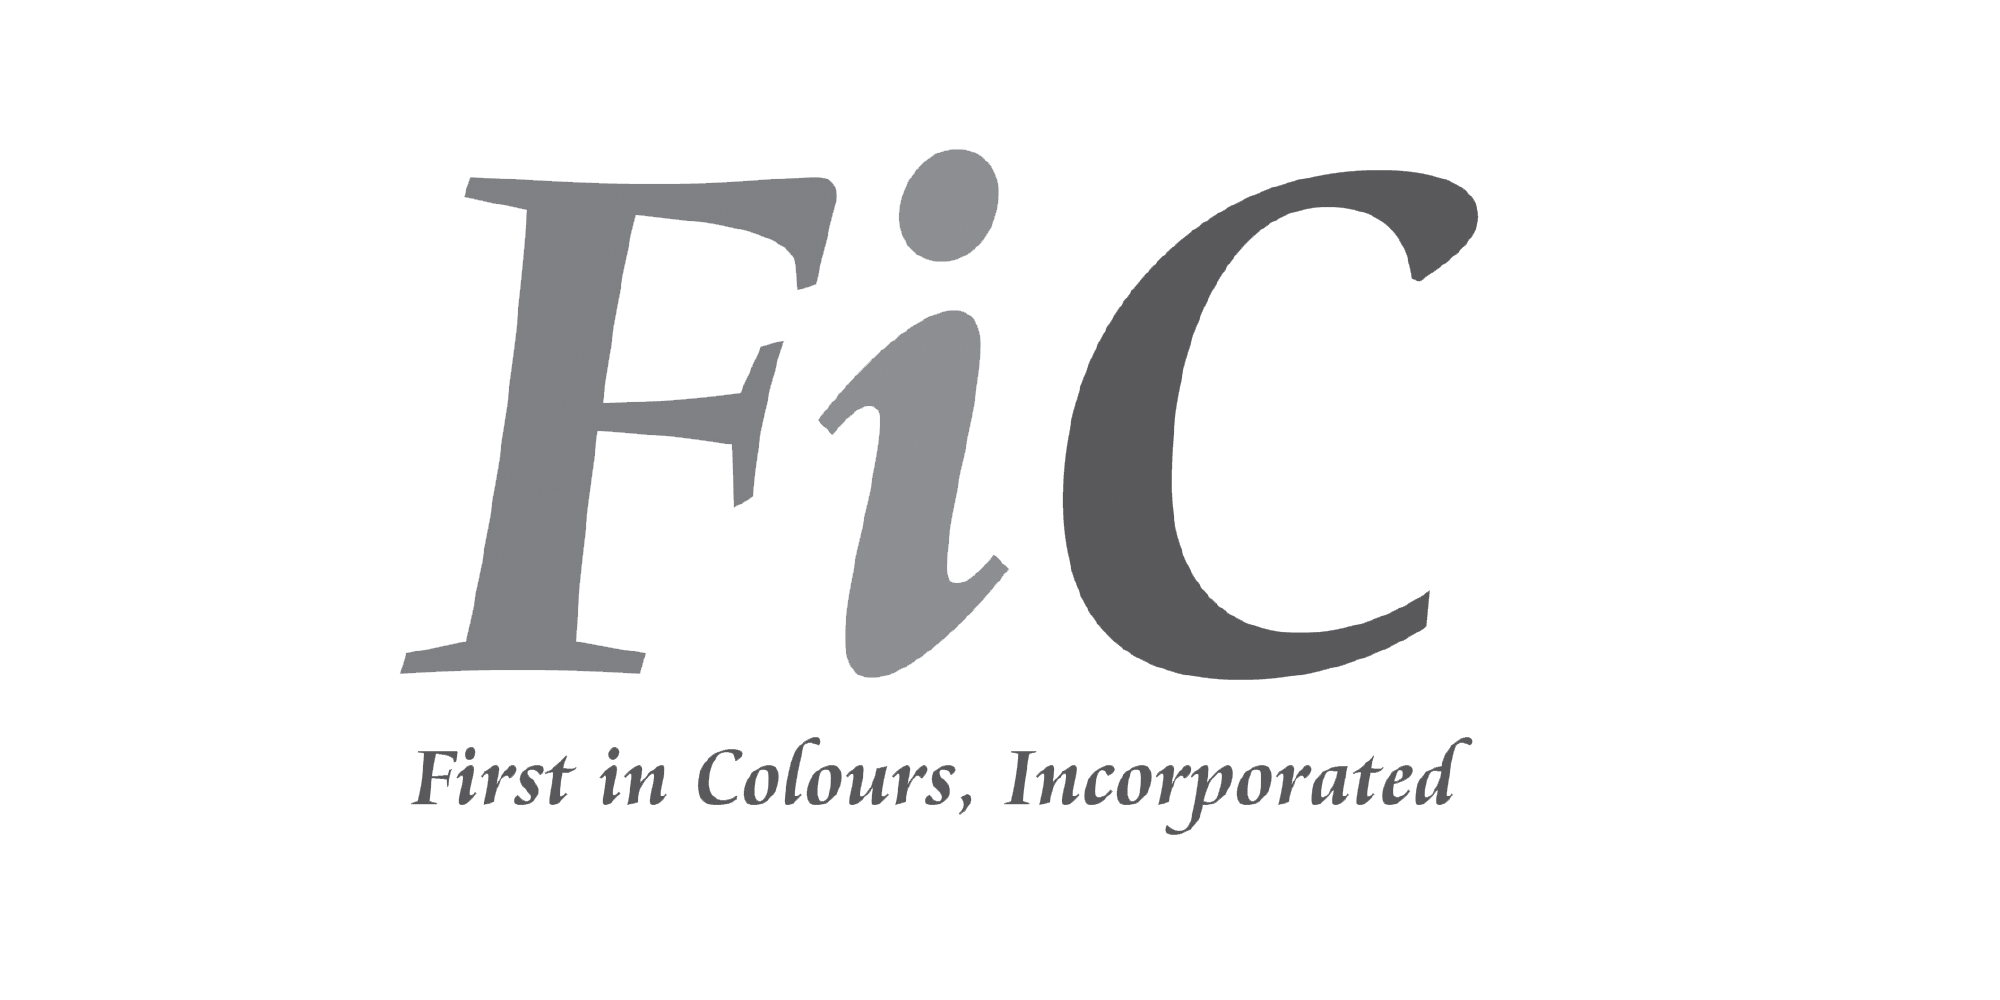 FIC First in Colours, Incorporated logo